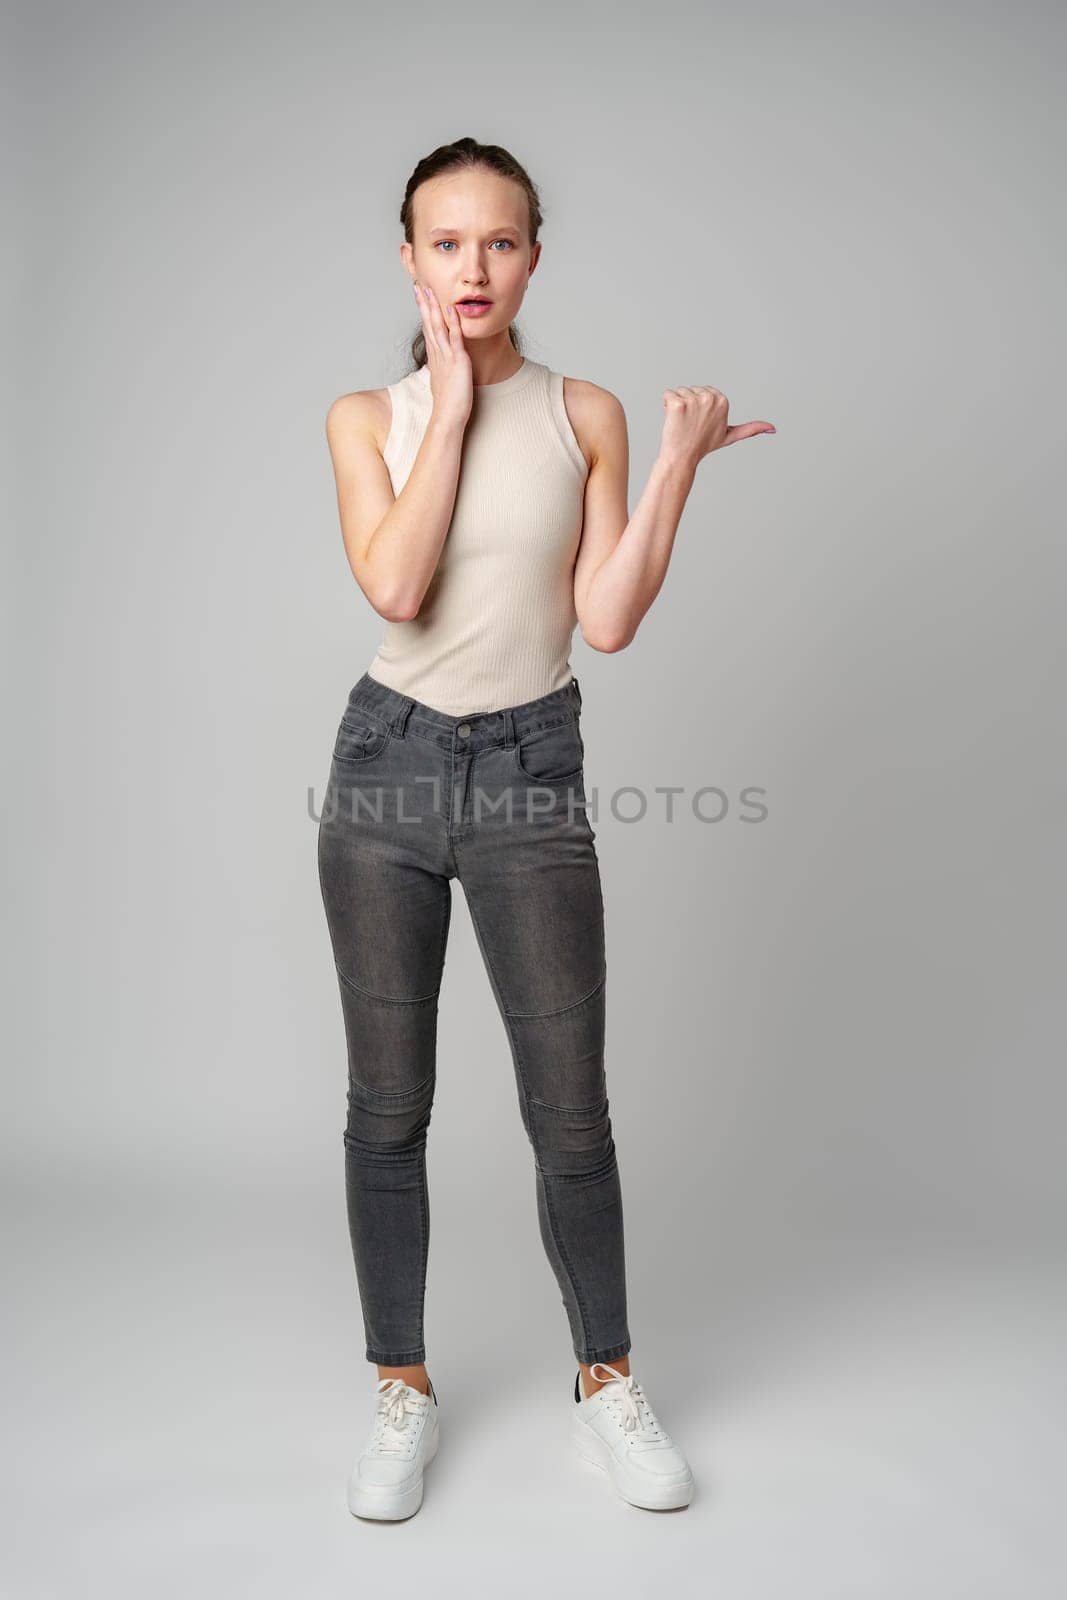 Startled Woman With Surprised Expression on gray background in studio